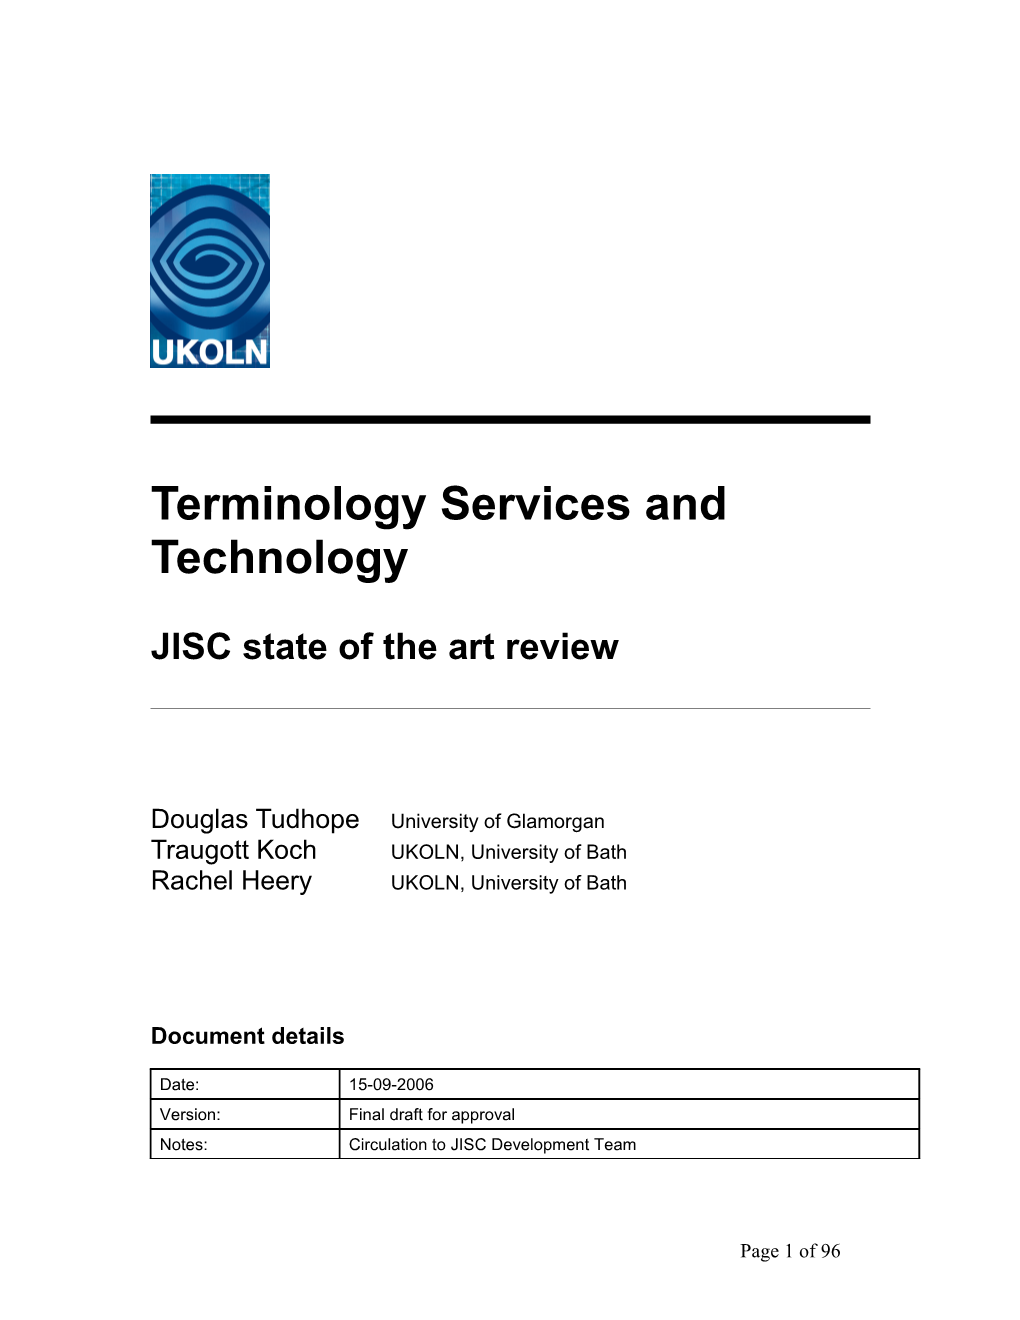 JISC State-Of-The-Art Study on Terminology Services and Technology